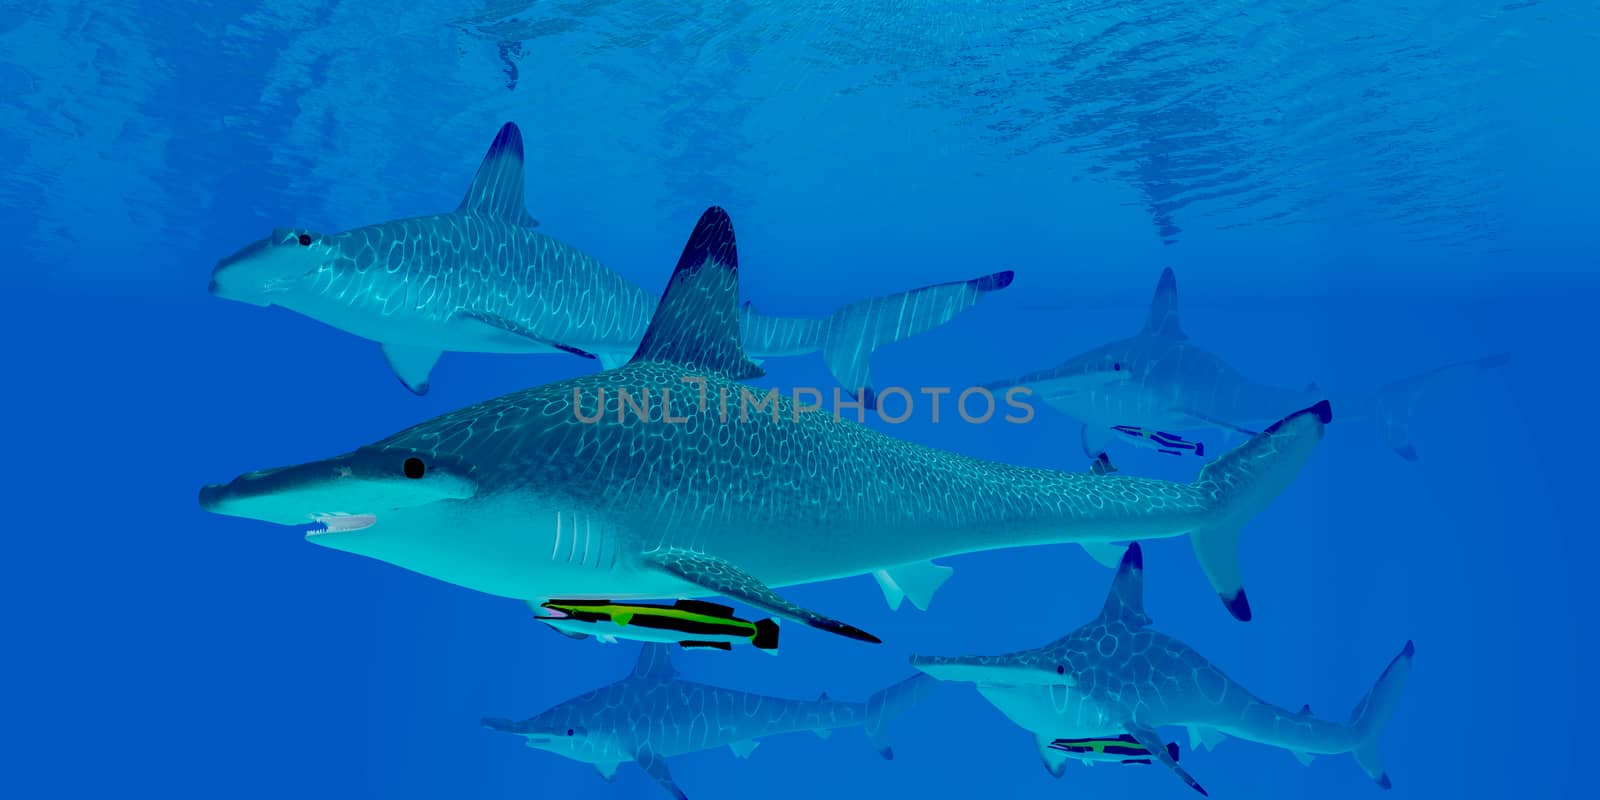 A group of predatory Hammerhead sharks swim together searching for prey in clear ocean waters.